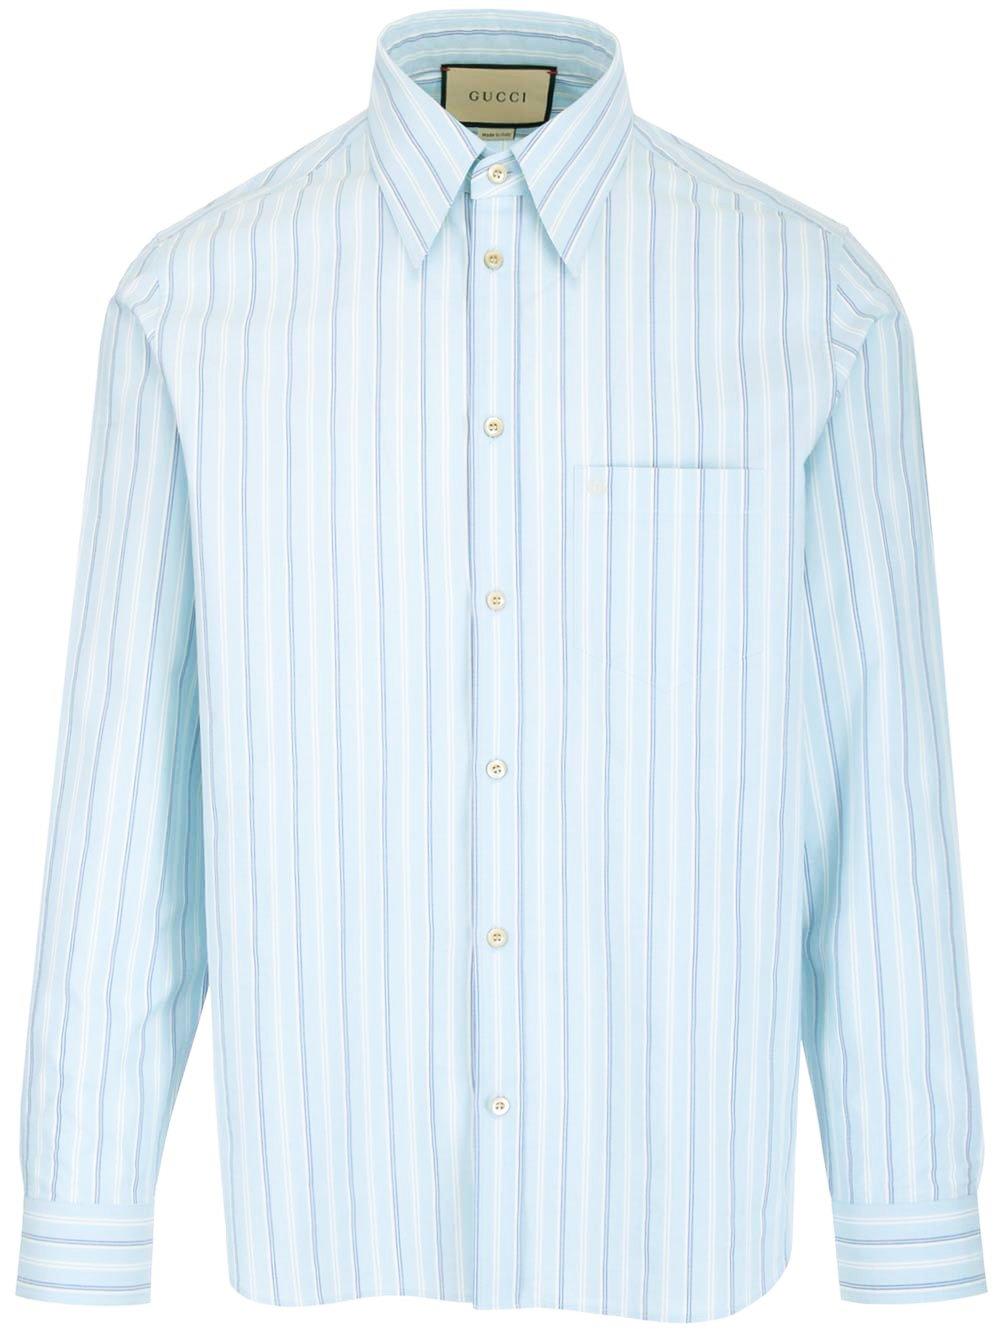 GUCCI STRIPED COLLARED LONG-SLEEVE SHIRT